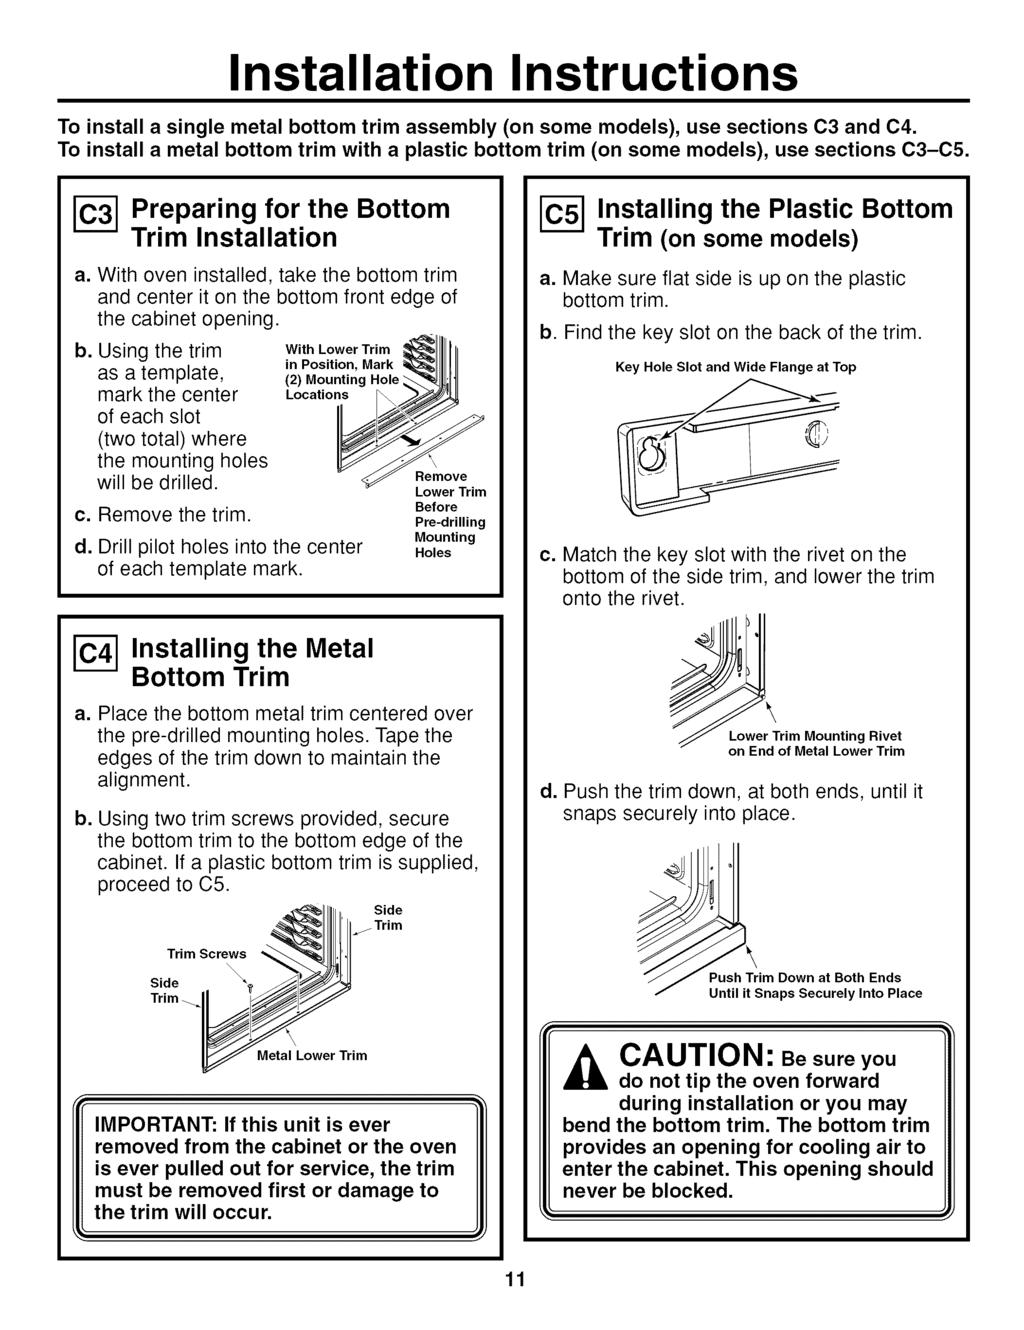 To install a single metal bottom trim assembly (on some models), use sections C3 and C4. To install a metal bottom trim with a plastic bottom trim (on some models), use sections C3-C5.